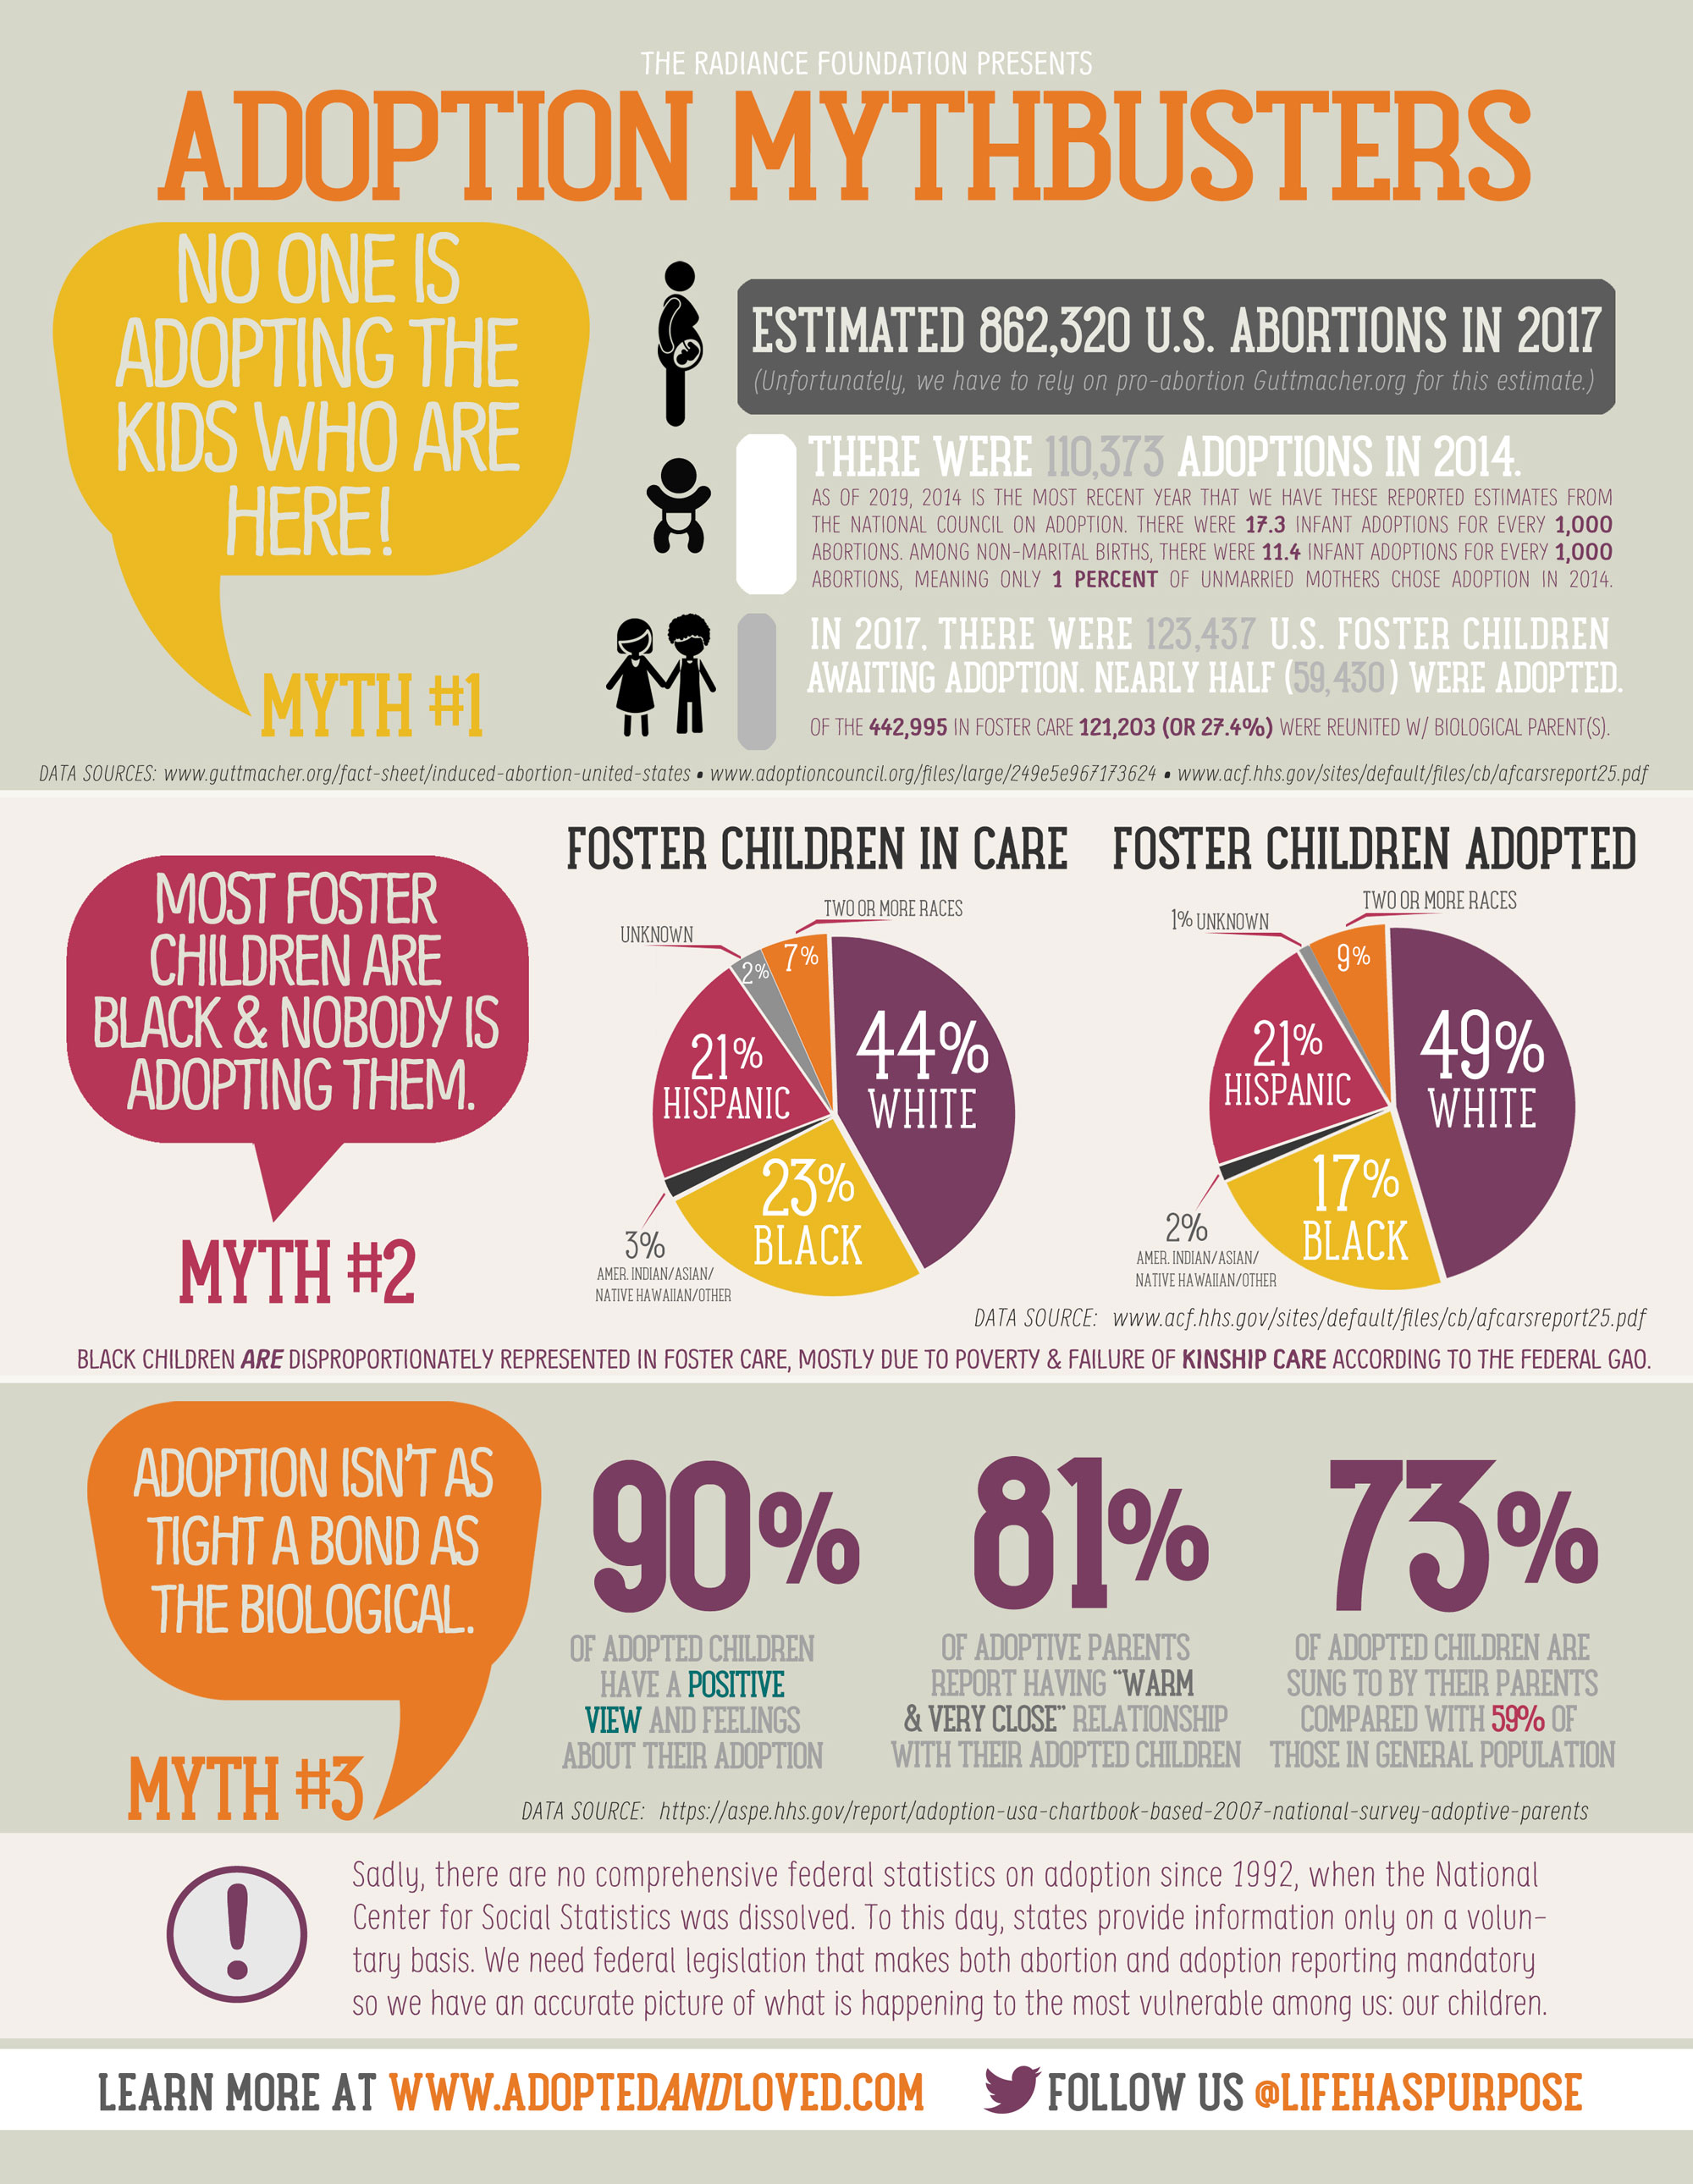 "Adoption Mythbusters" by The Radiance Foundation